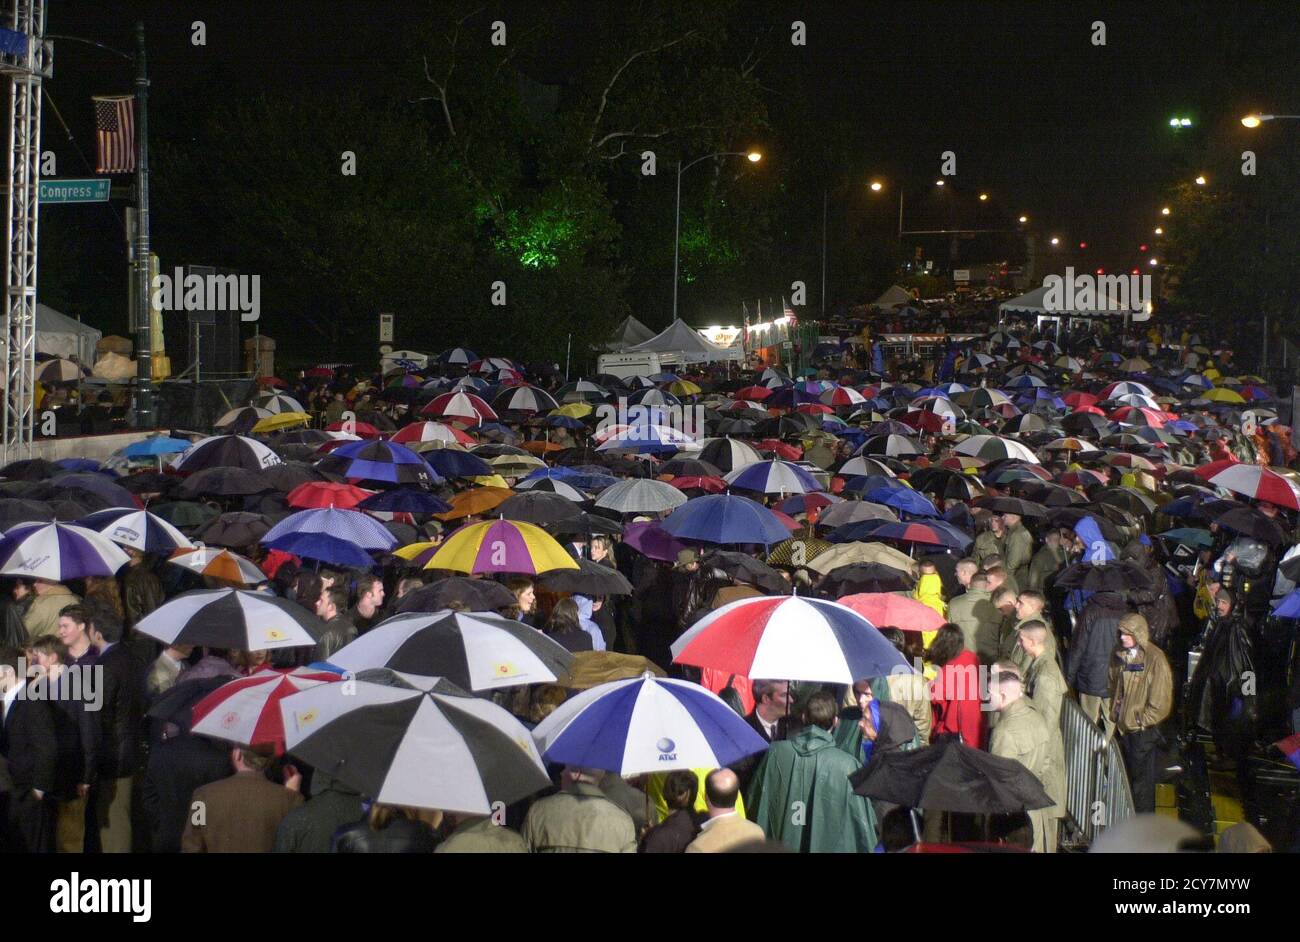 Austin, Texas 08NOV00:  A large crowd gathers in the rain in downtown Austin, Texas at 11th and Congress to celebrate Texas Governor George W. Bush's early lead in the U.S. presidential race. The race was too close to call early Wednesday. Stock Photo